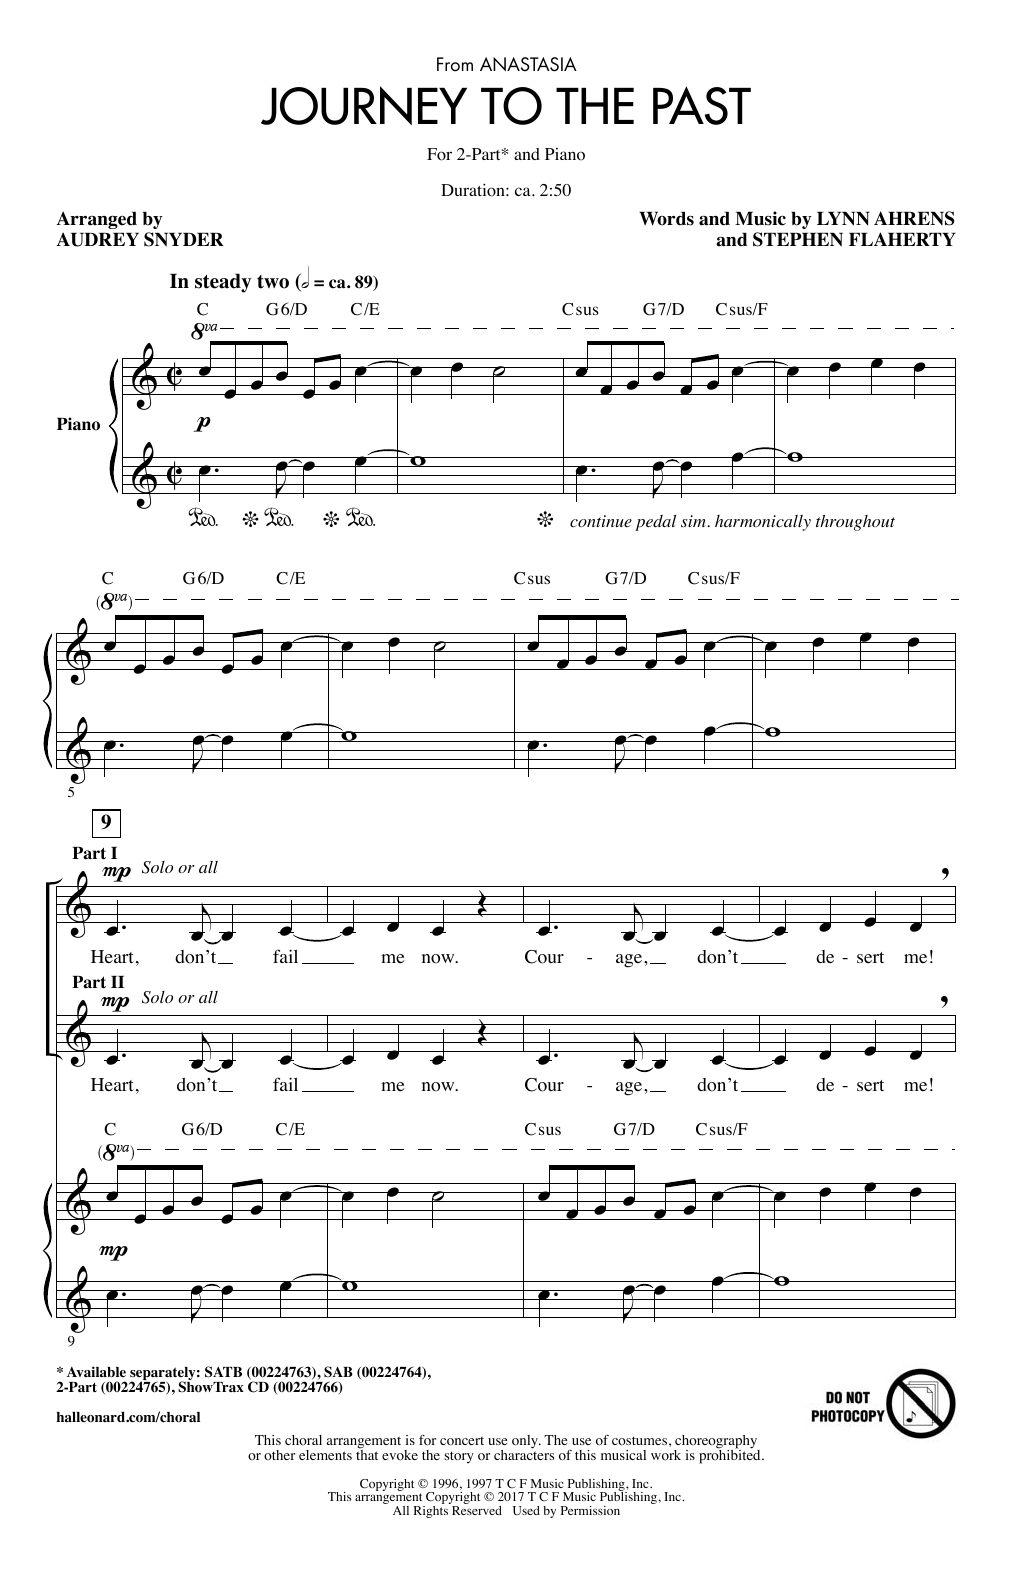 Download Audrey Snyder Journey To The Past Sheet Music